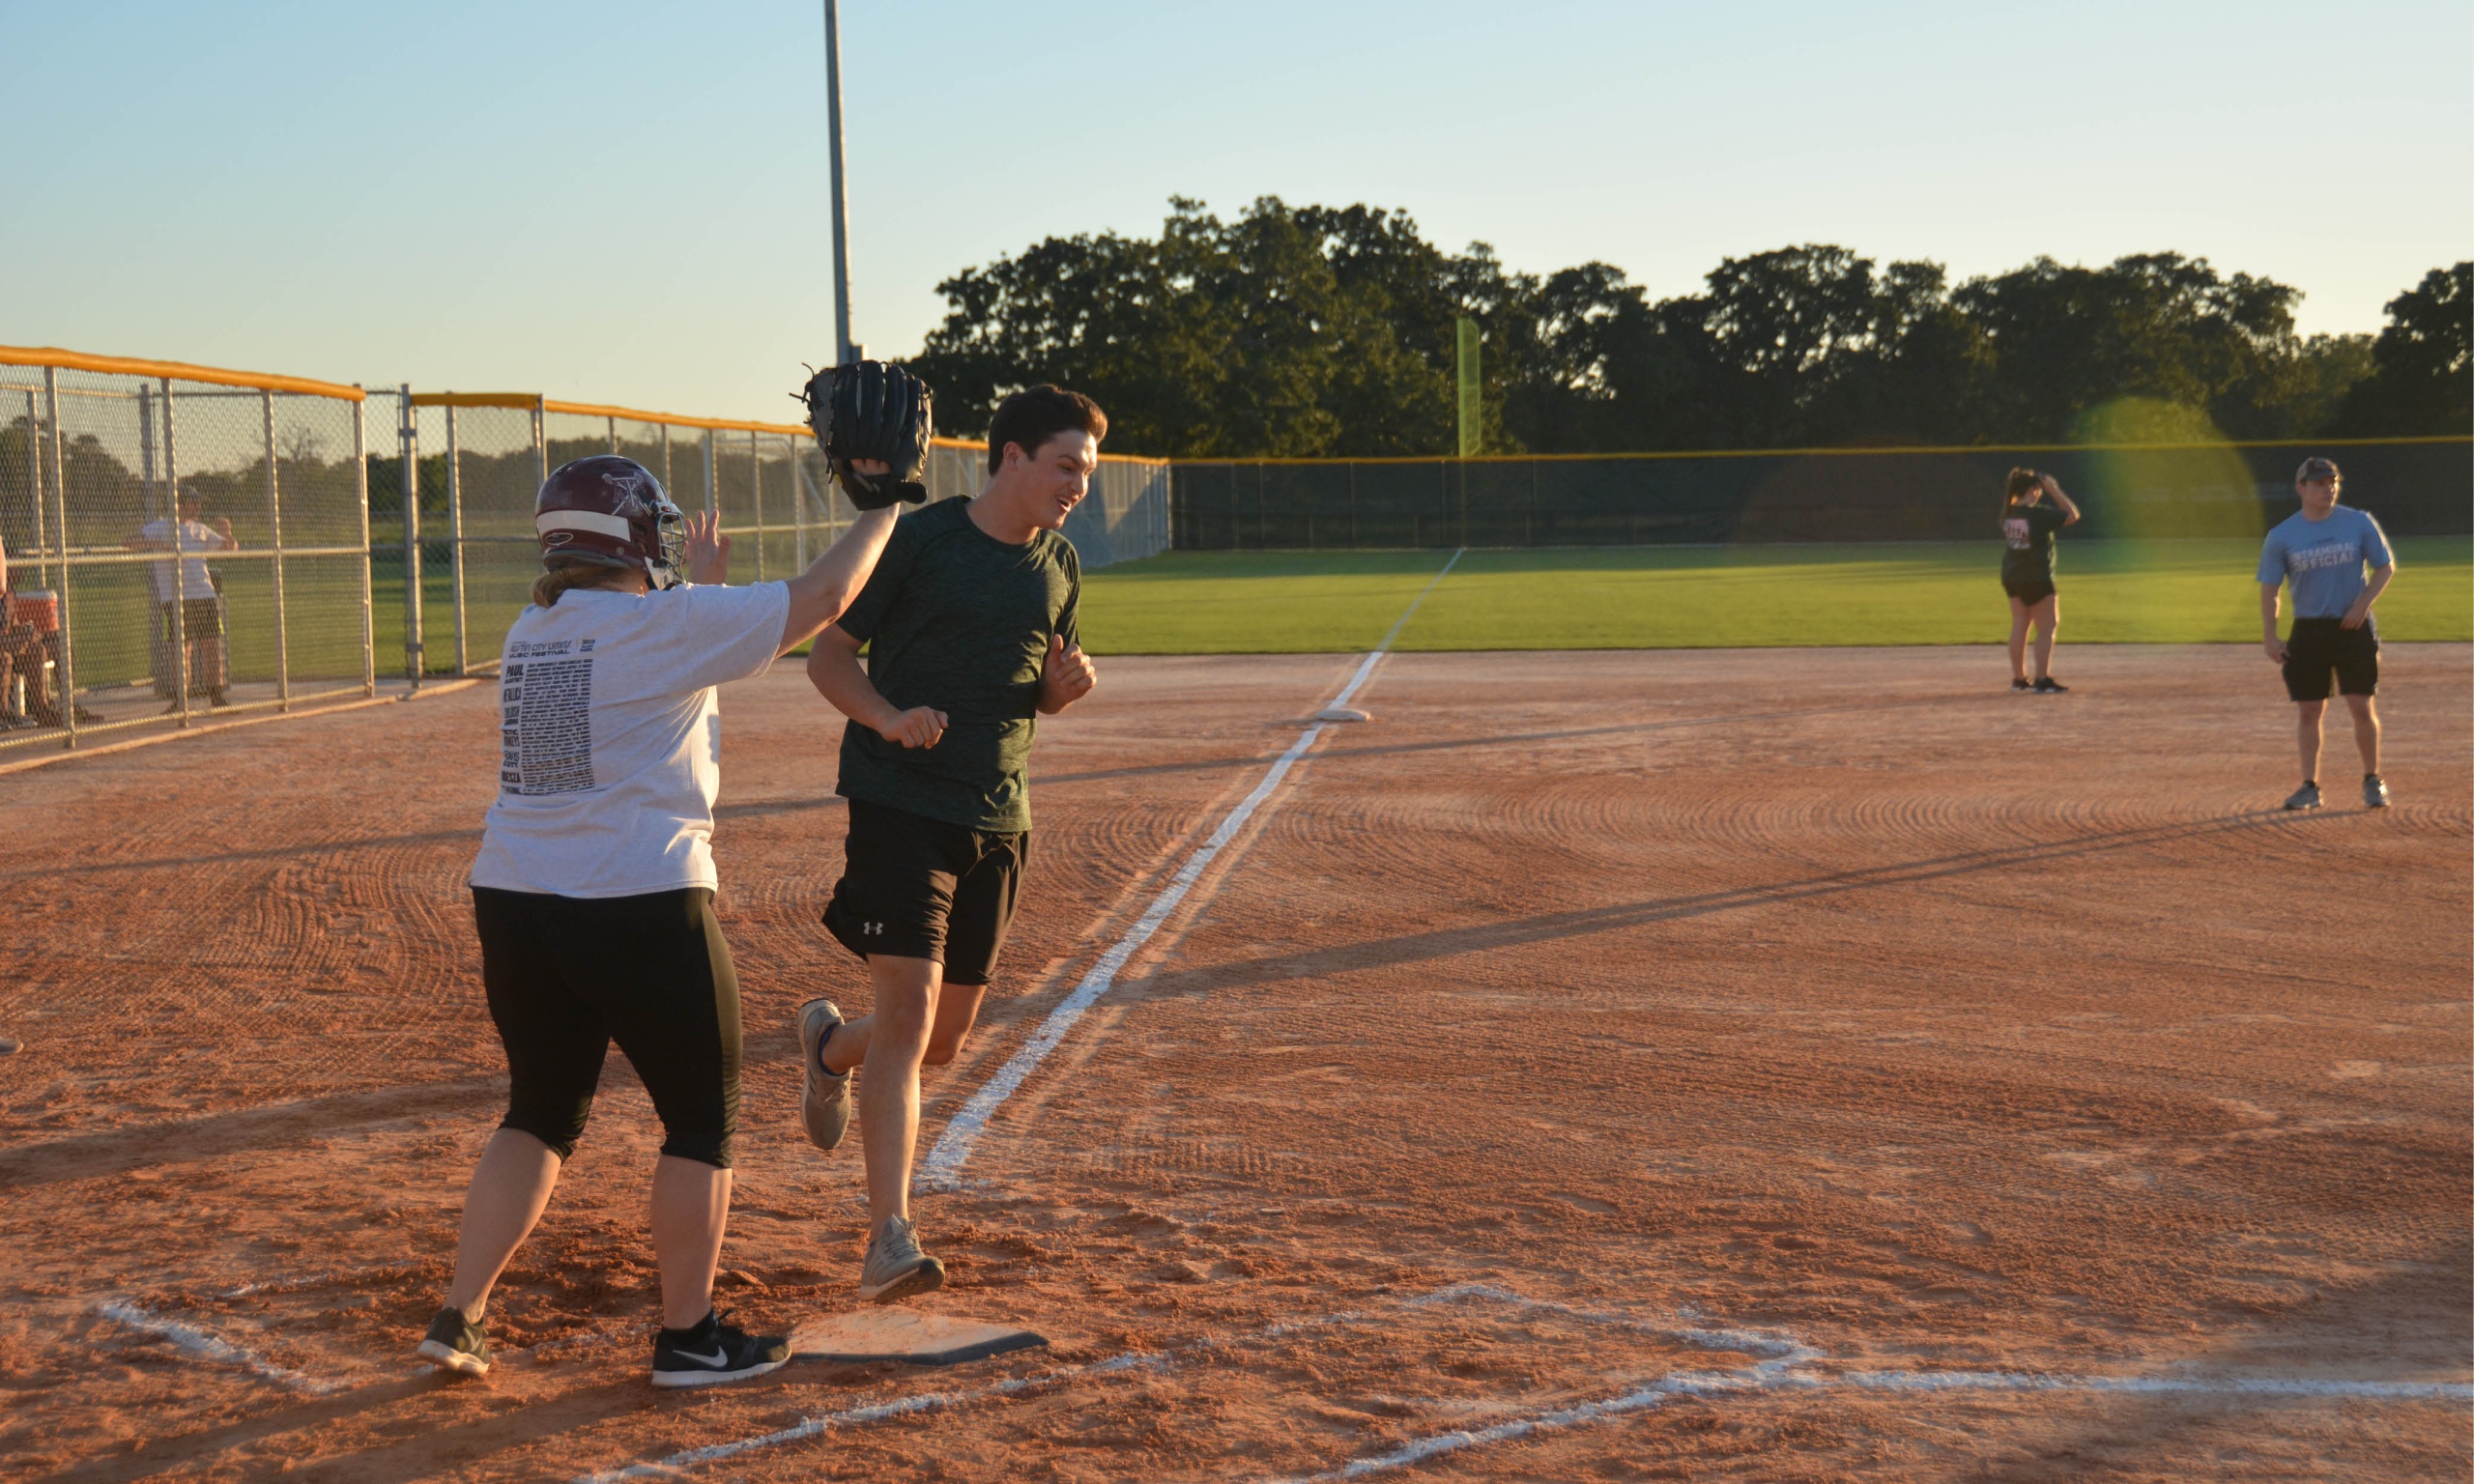 Intramural slowpitch softball game in progress with players on the field.